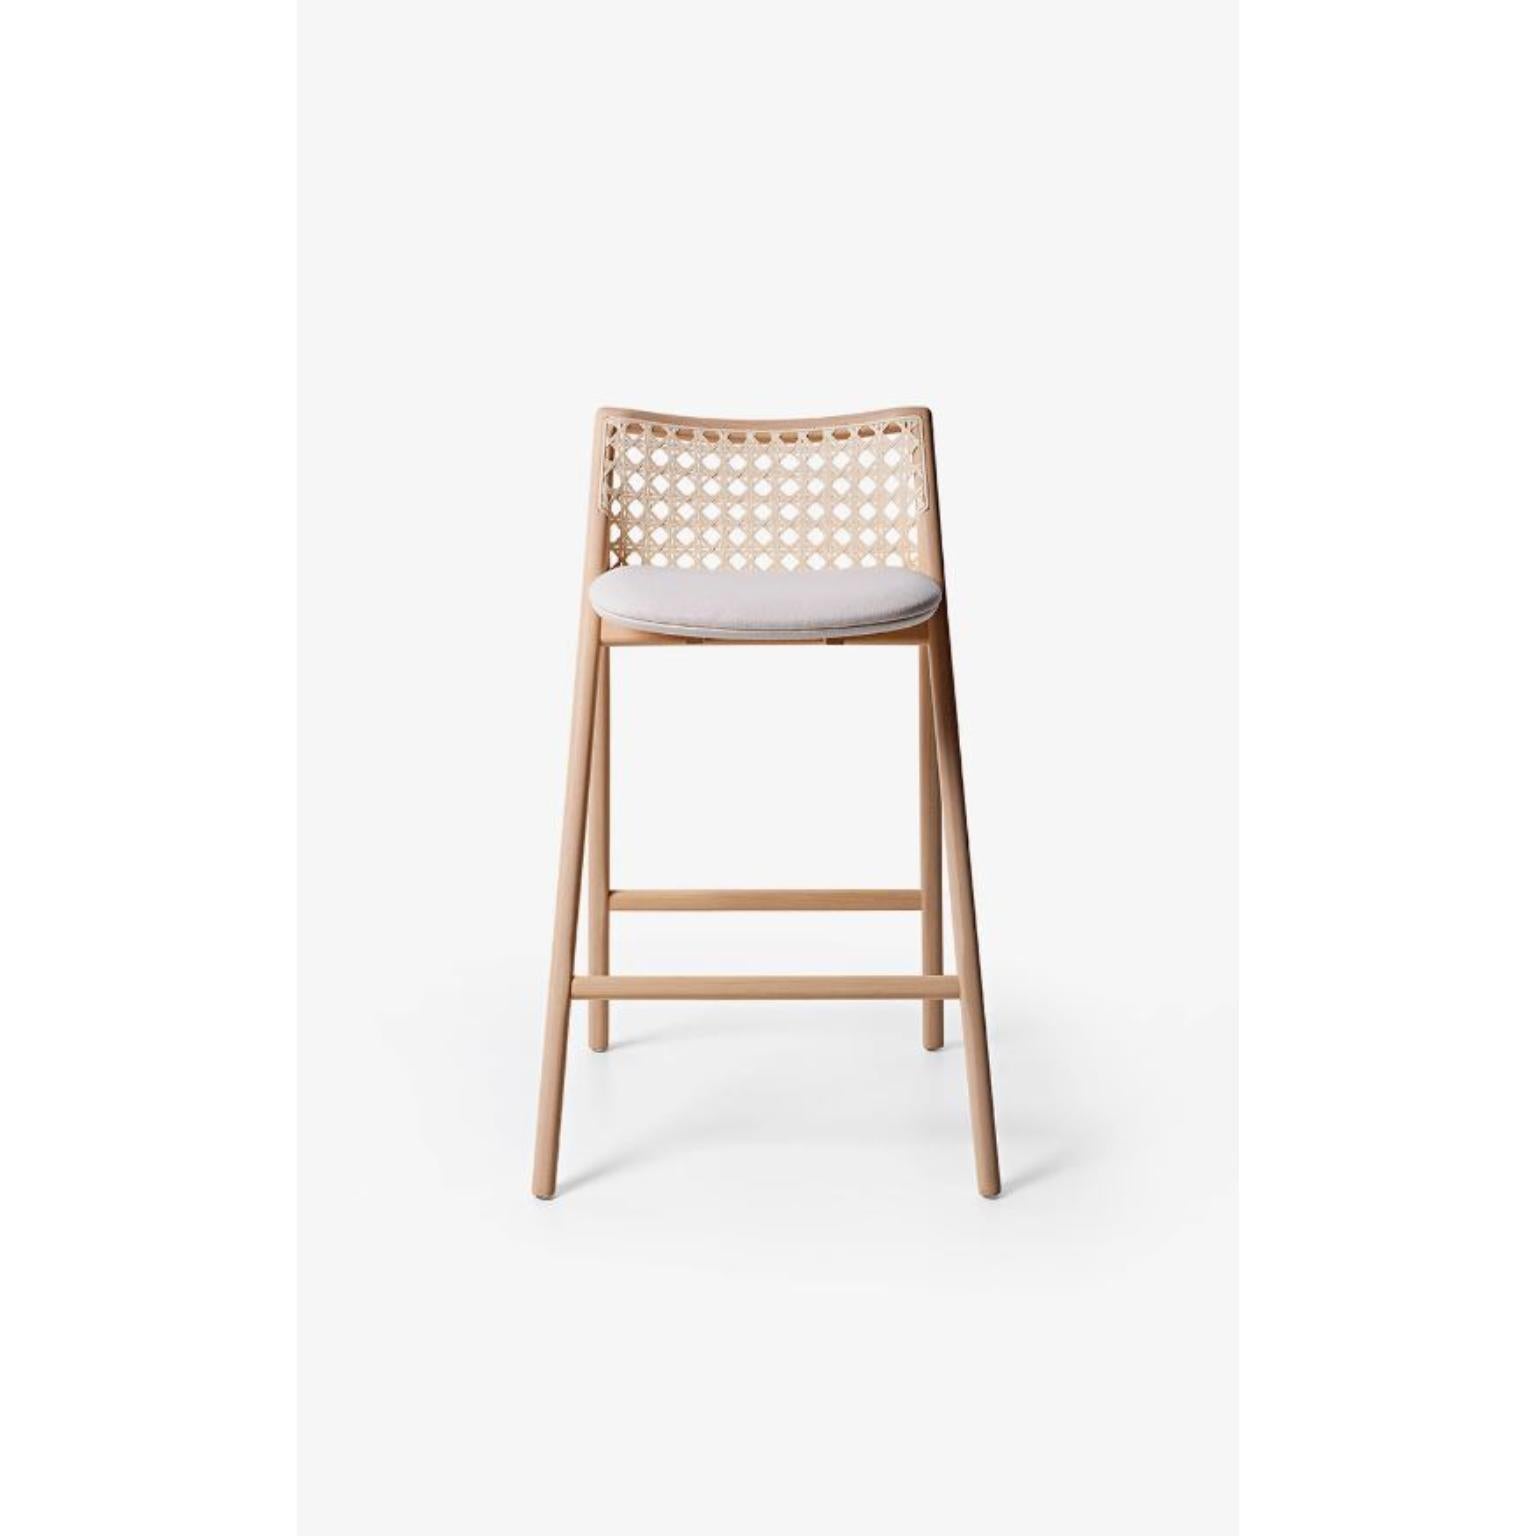 Bleached Tauari Tela Bar Stool by Wentz
Dimensions: D 58 x W 60 x H 94 cm
Materials: Tauari Wood, Cotton, Weave, Plywood, Upholstery.
Weight: 6,1kg / 13,4 lbs

The Tela armchair is a meeting between contemporary design and traditional Brazilian